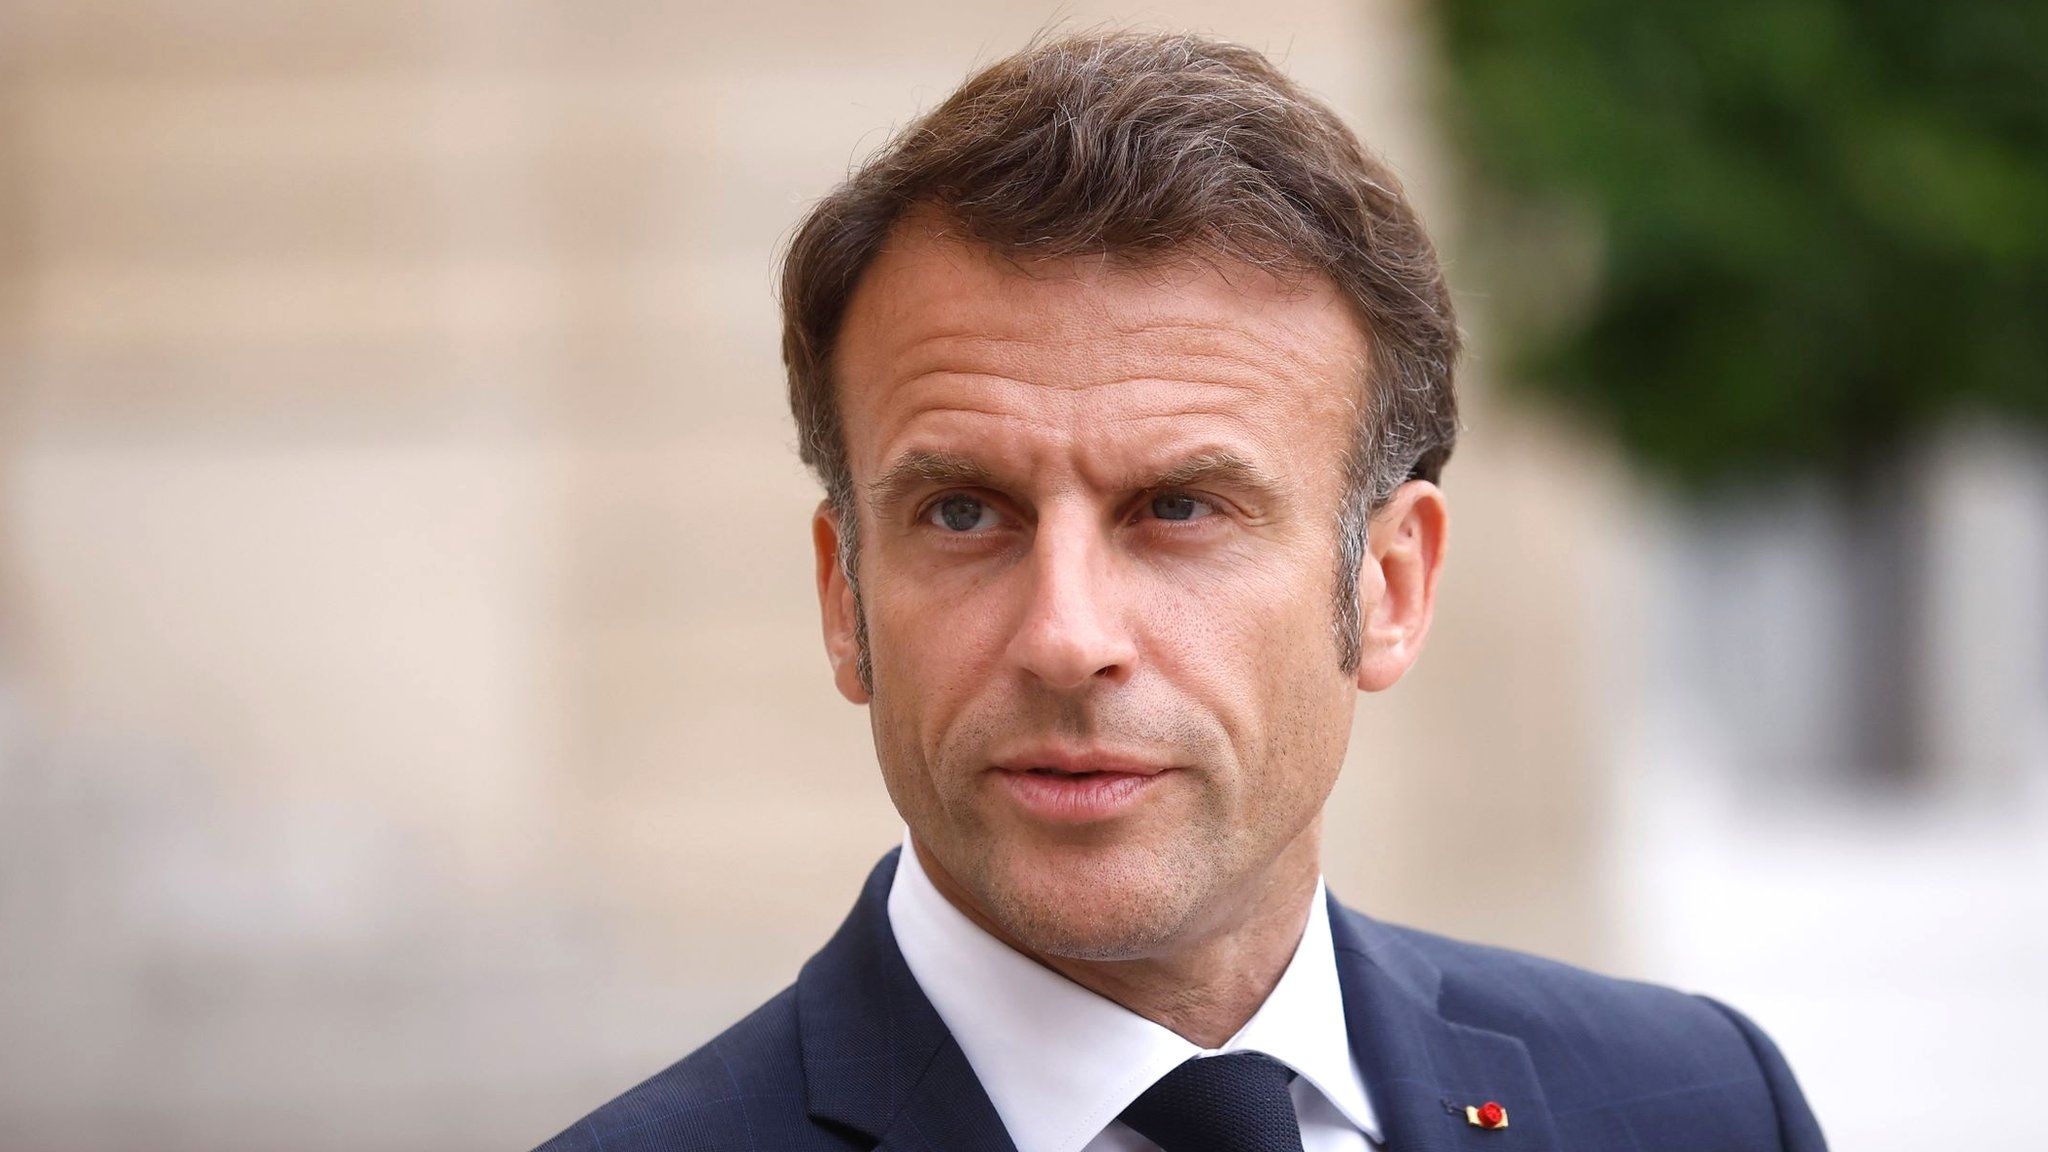 Emmanuel Macron pictured before a meeting with Nato chief Jens Stoltenberg on 28 June